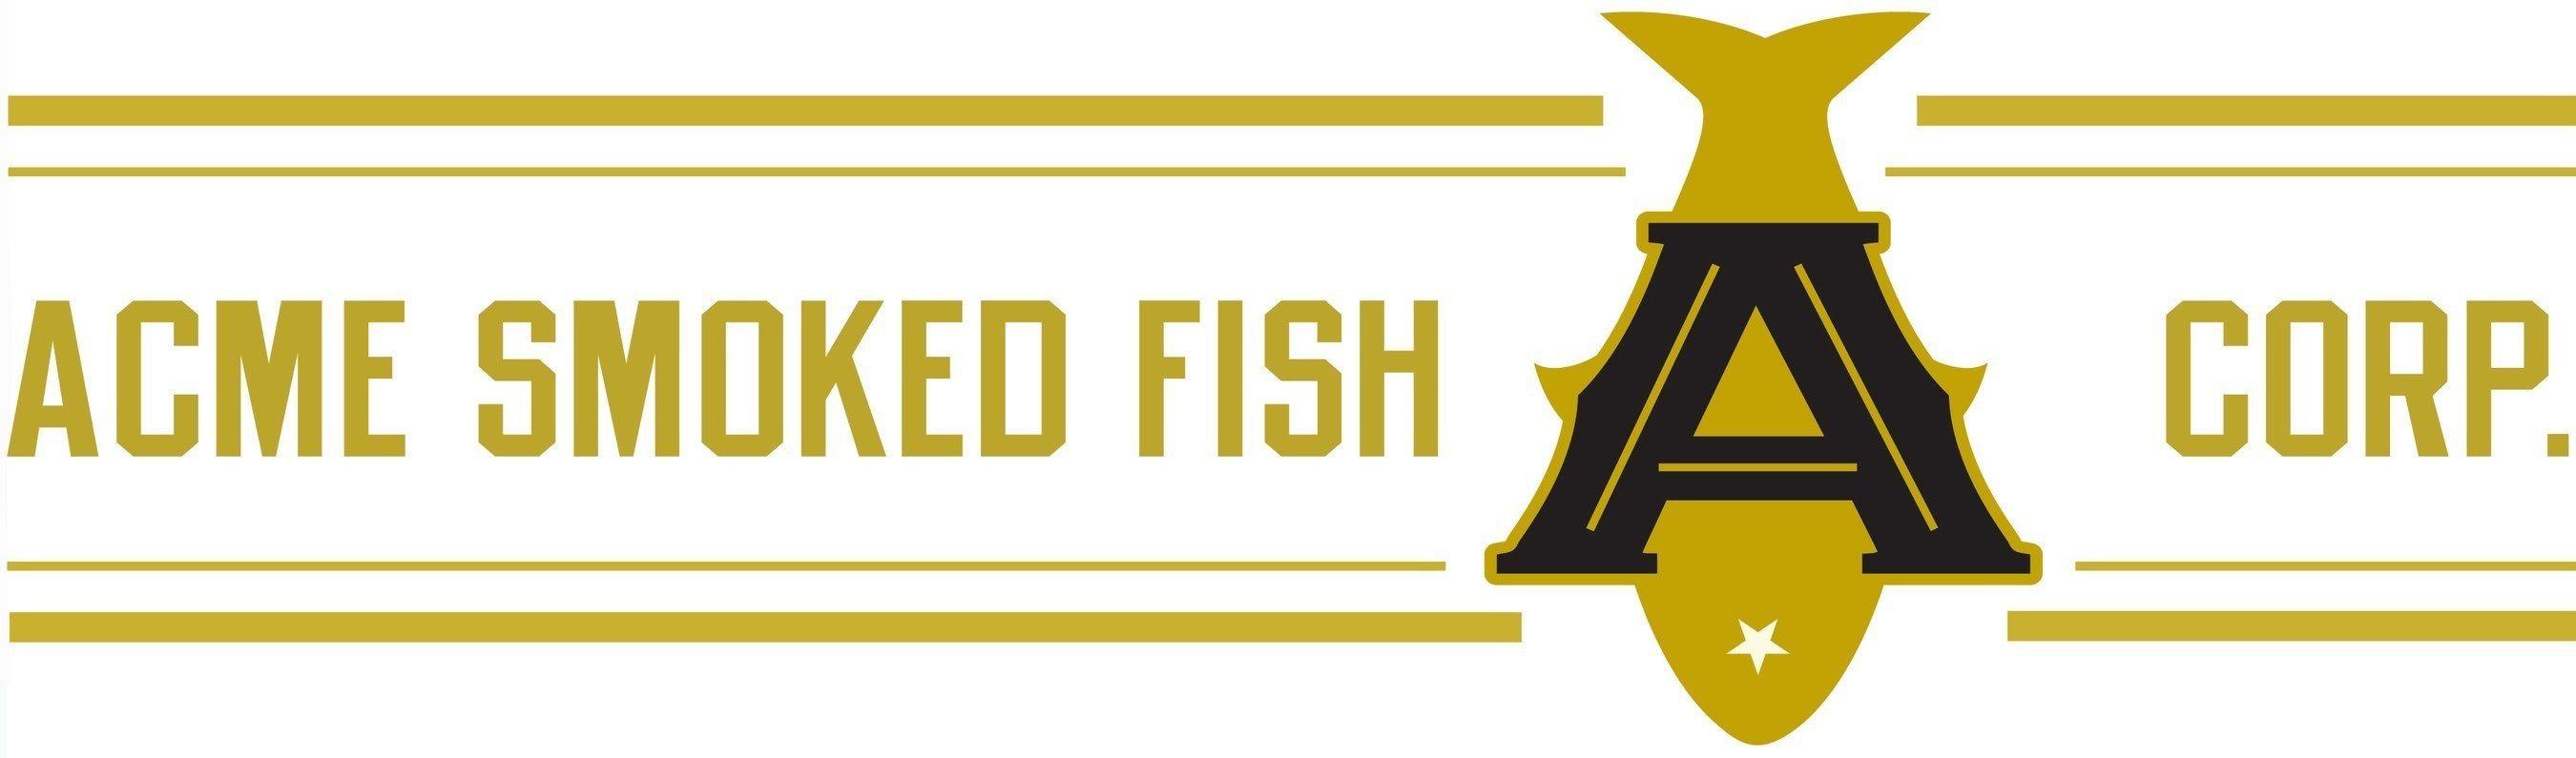 Yellow Corp Logo - Acme Smoked Fish Corporation Opens Largest Smoked Salmon Facility in ...